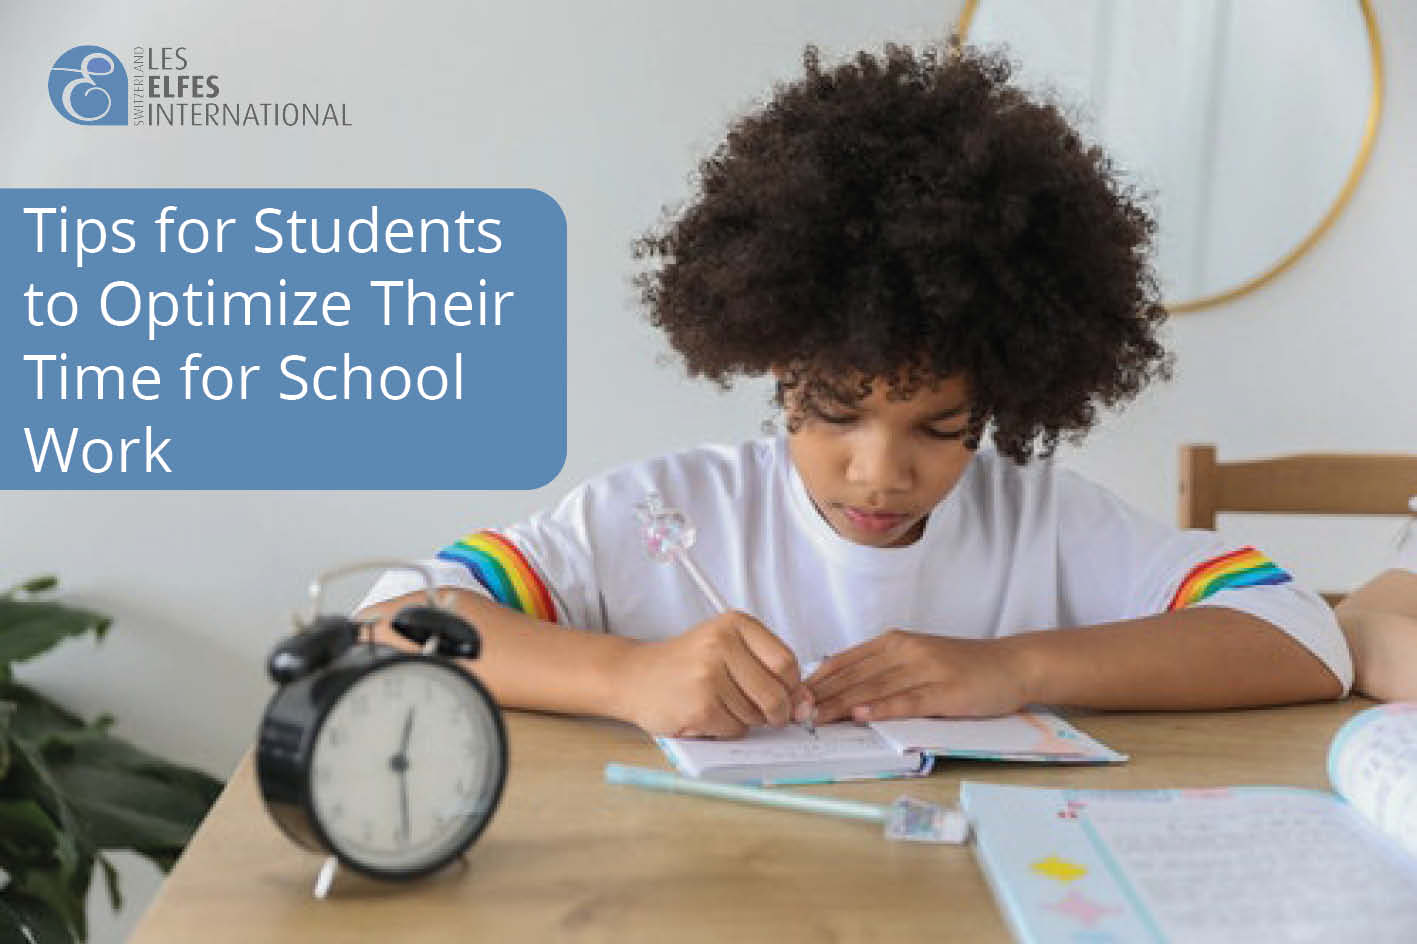 Tips for Students to Optimize Their Time for School Work